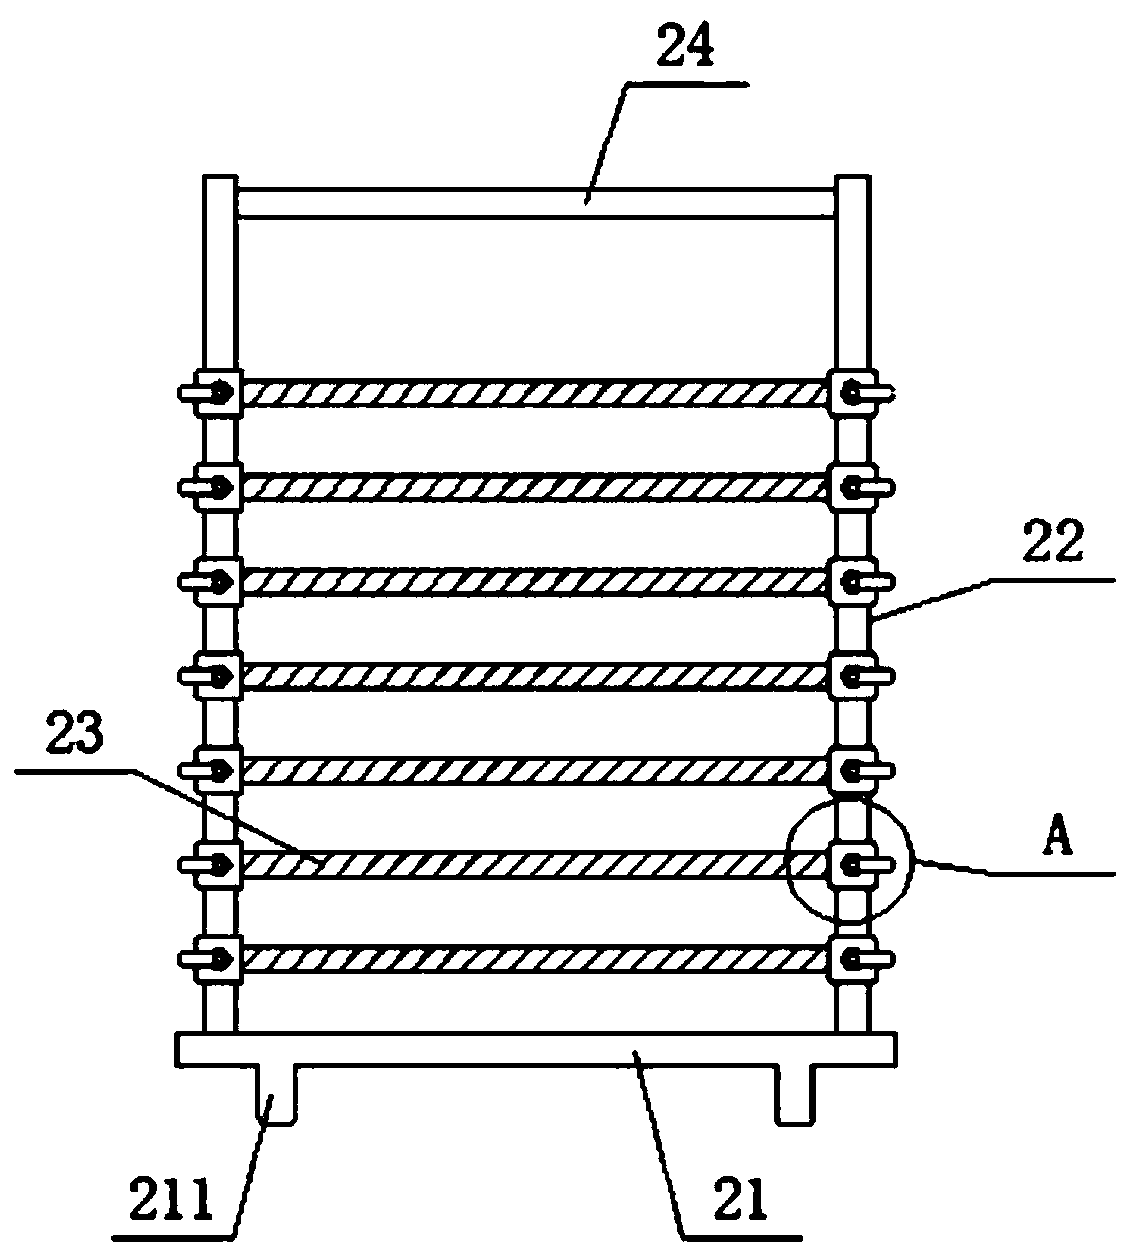 Meat drying device for food processing